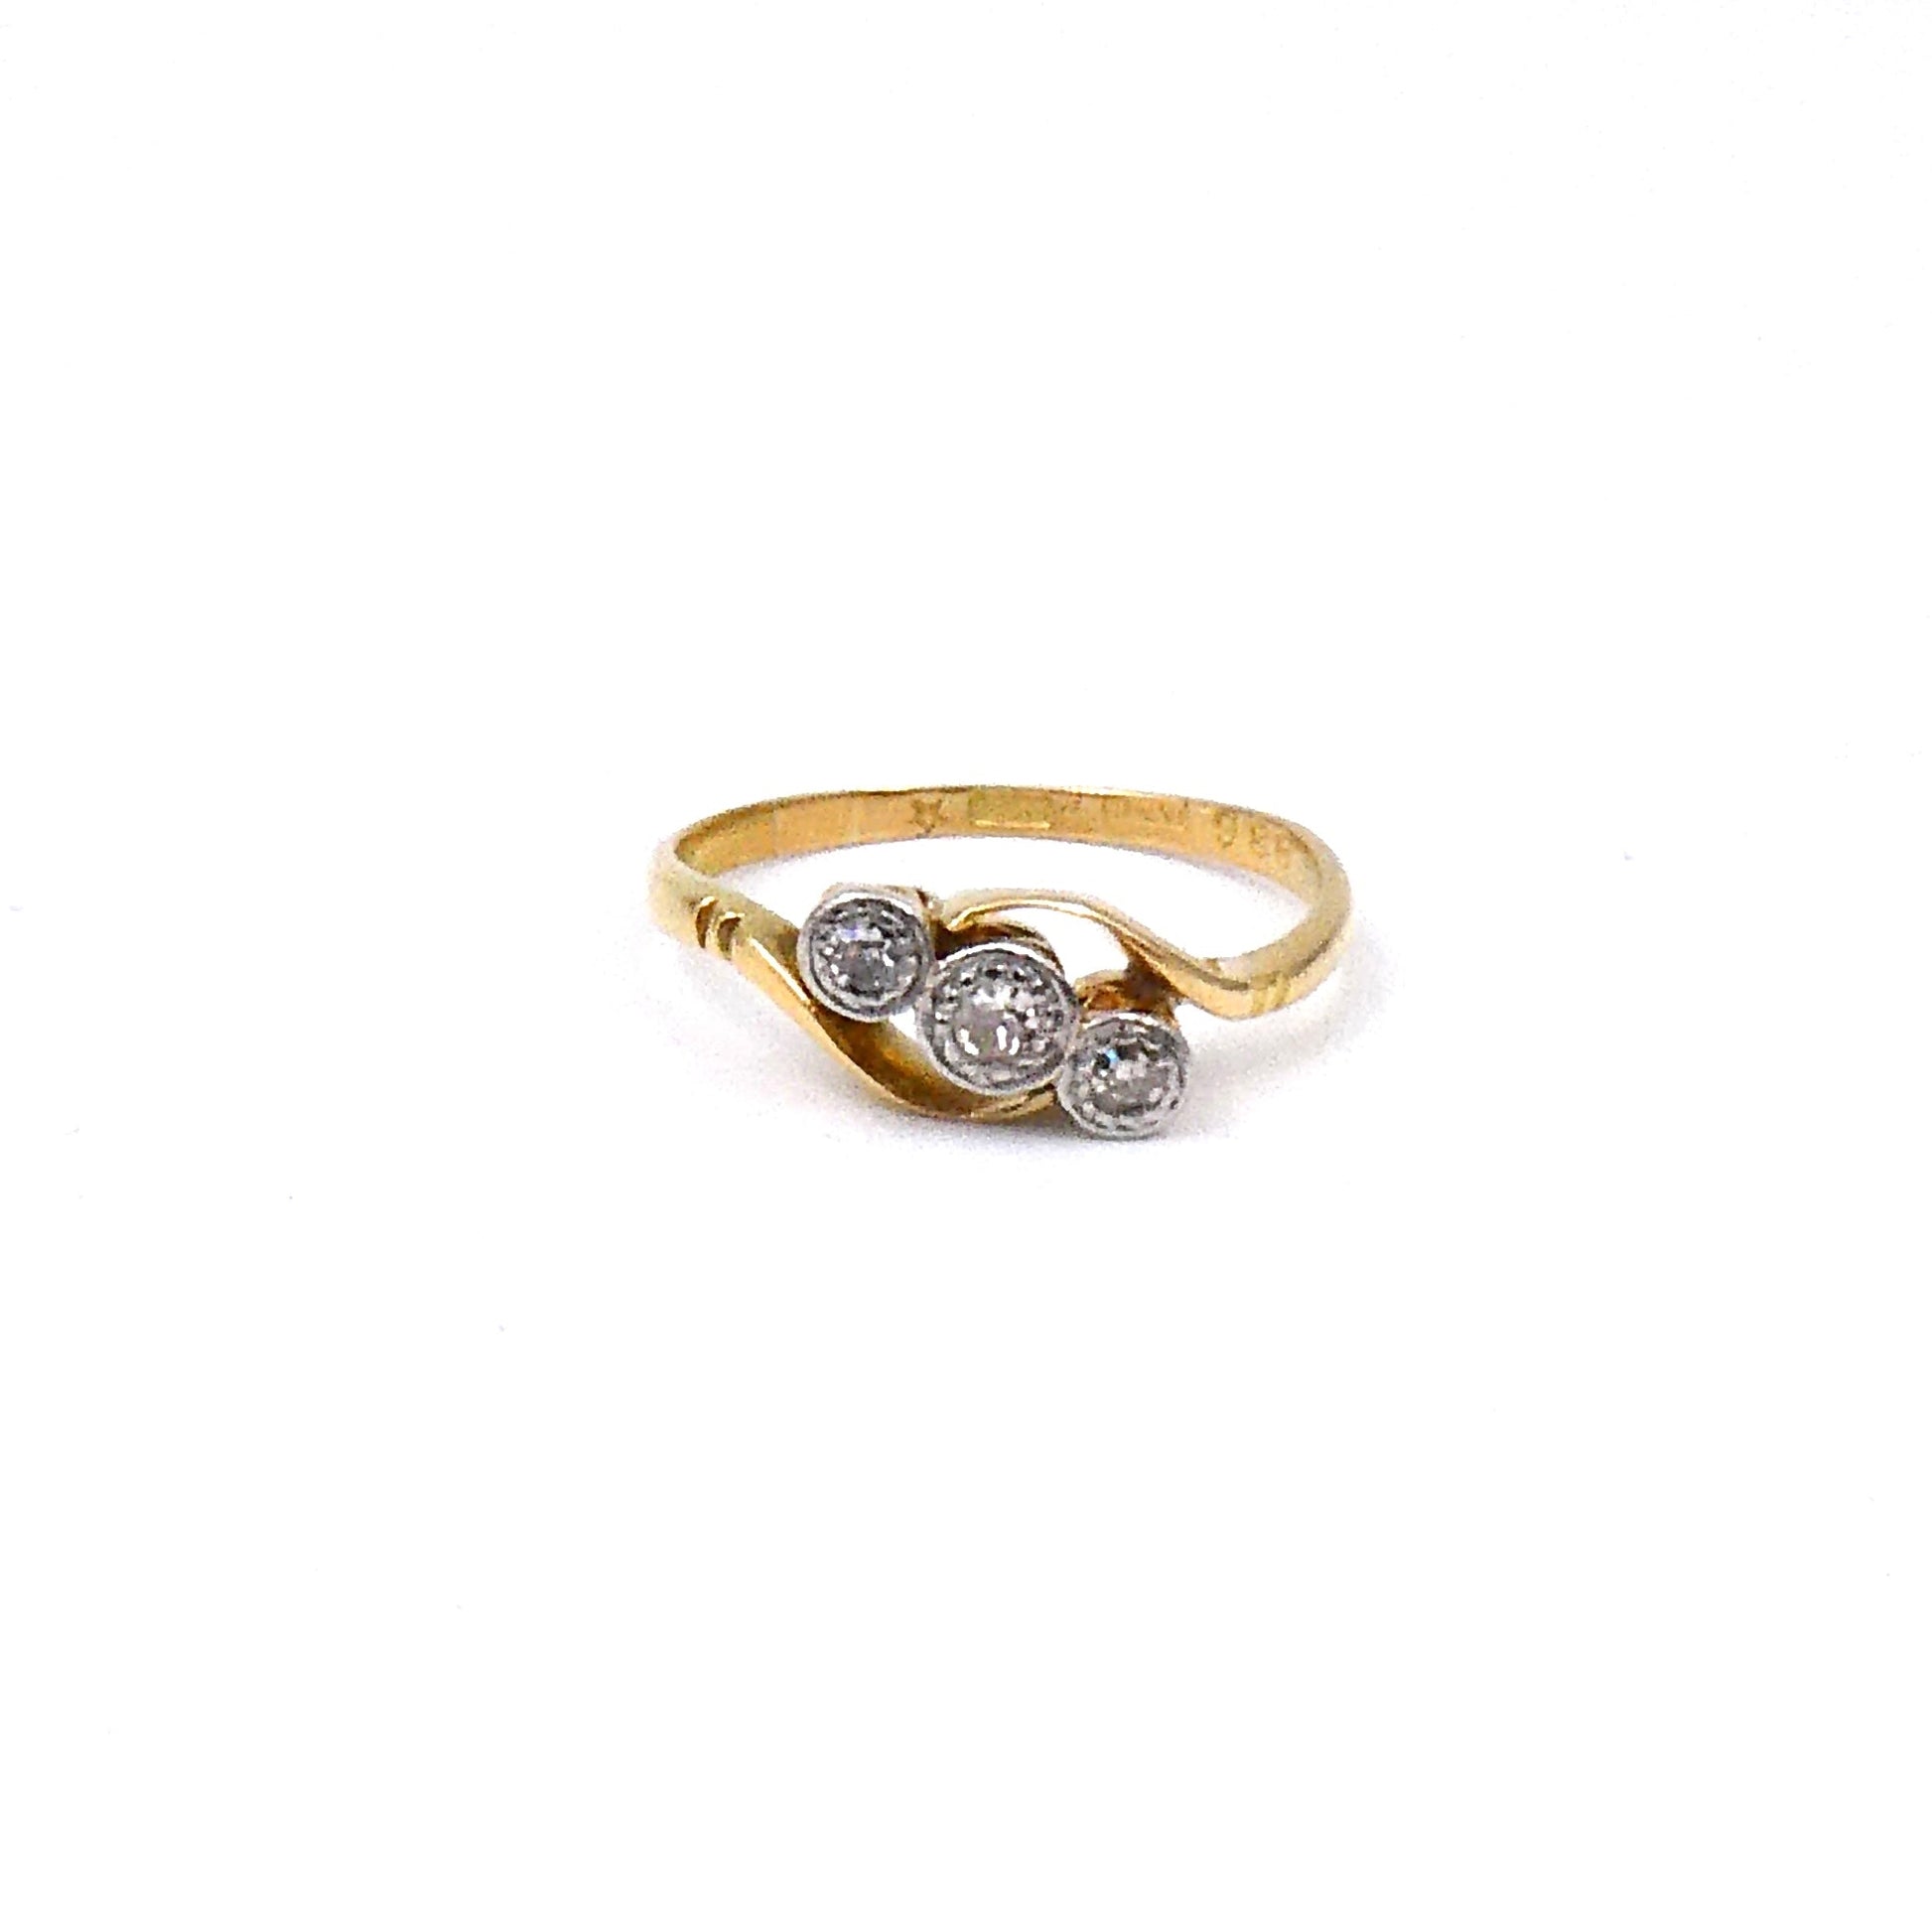 Vintage diamond ring, set with three diamonds in a platinum setting on an 18kt gold curved band. - Collected